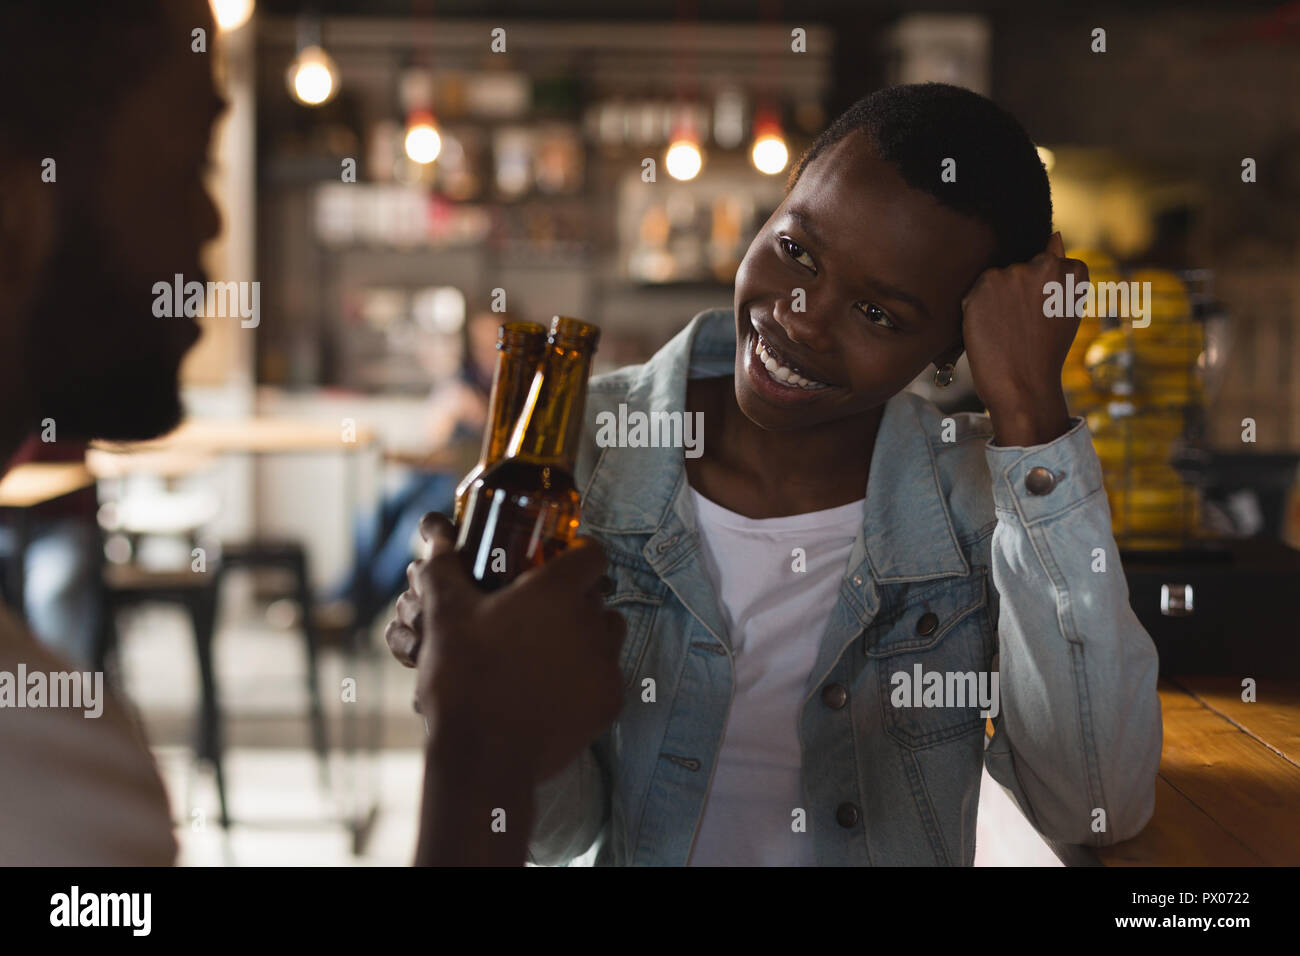 Couple toasting beer bottle in cafe Stock Photo